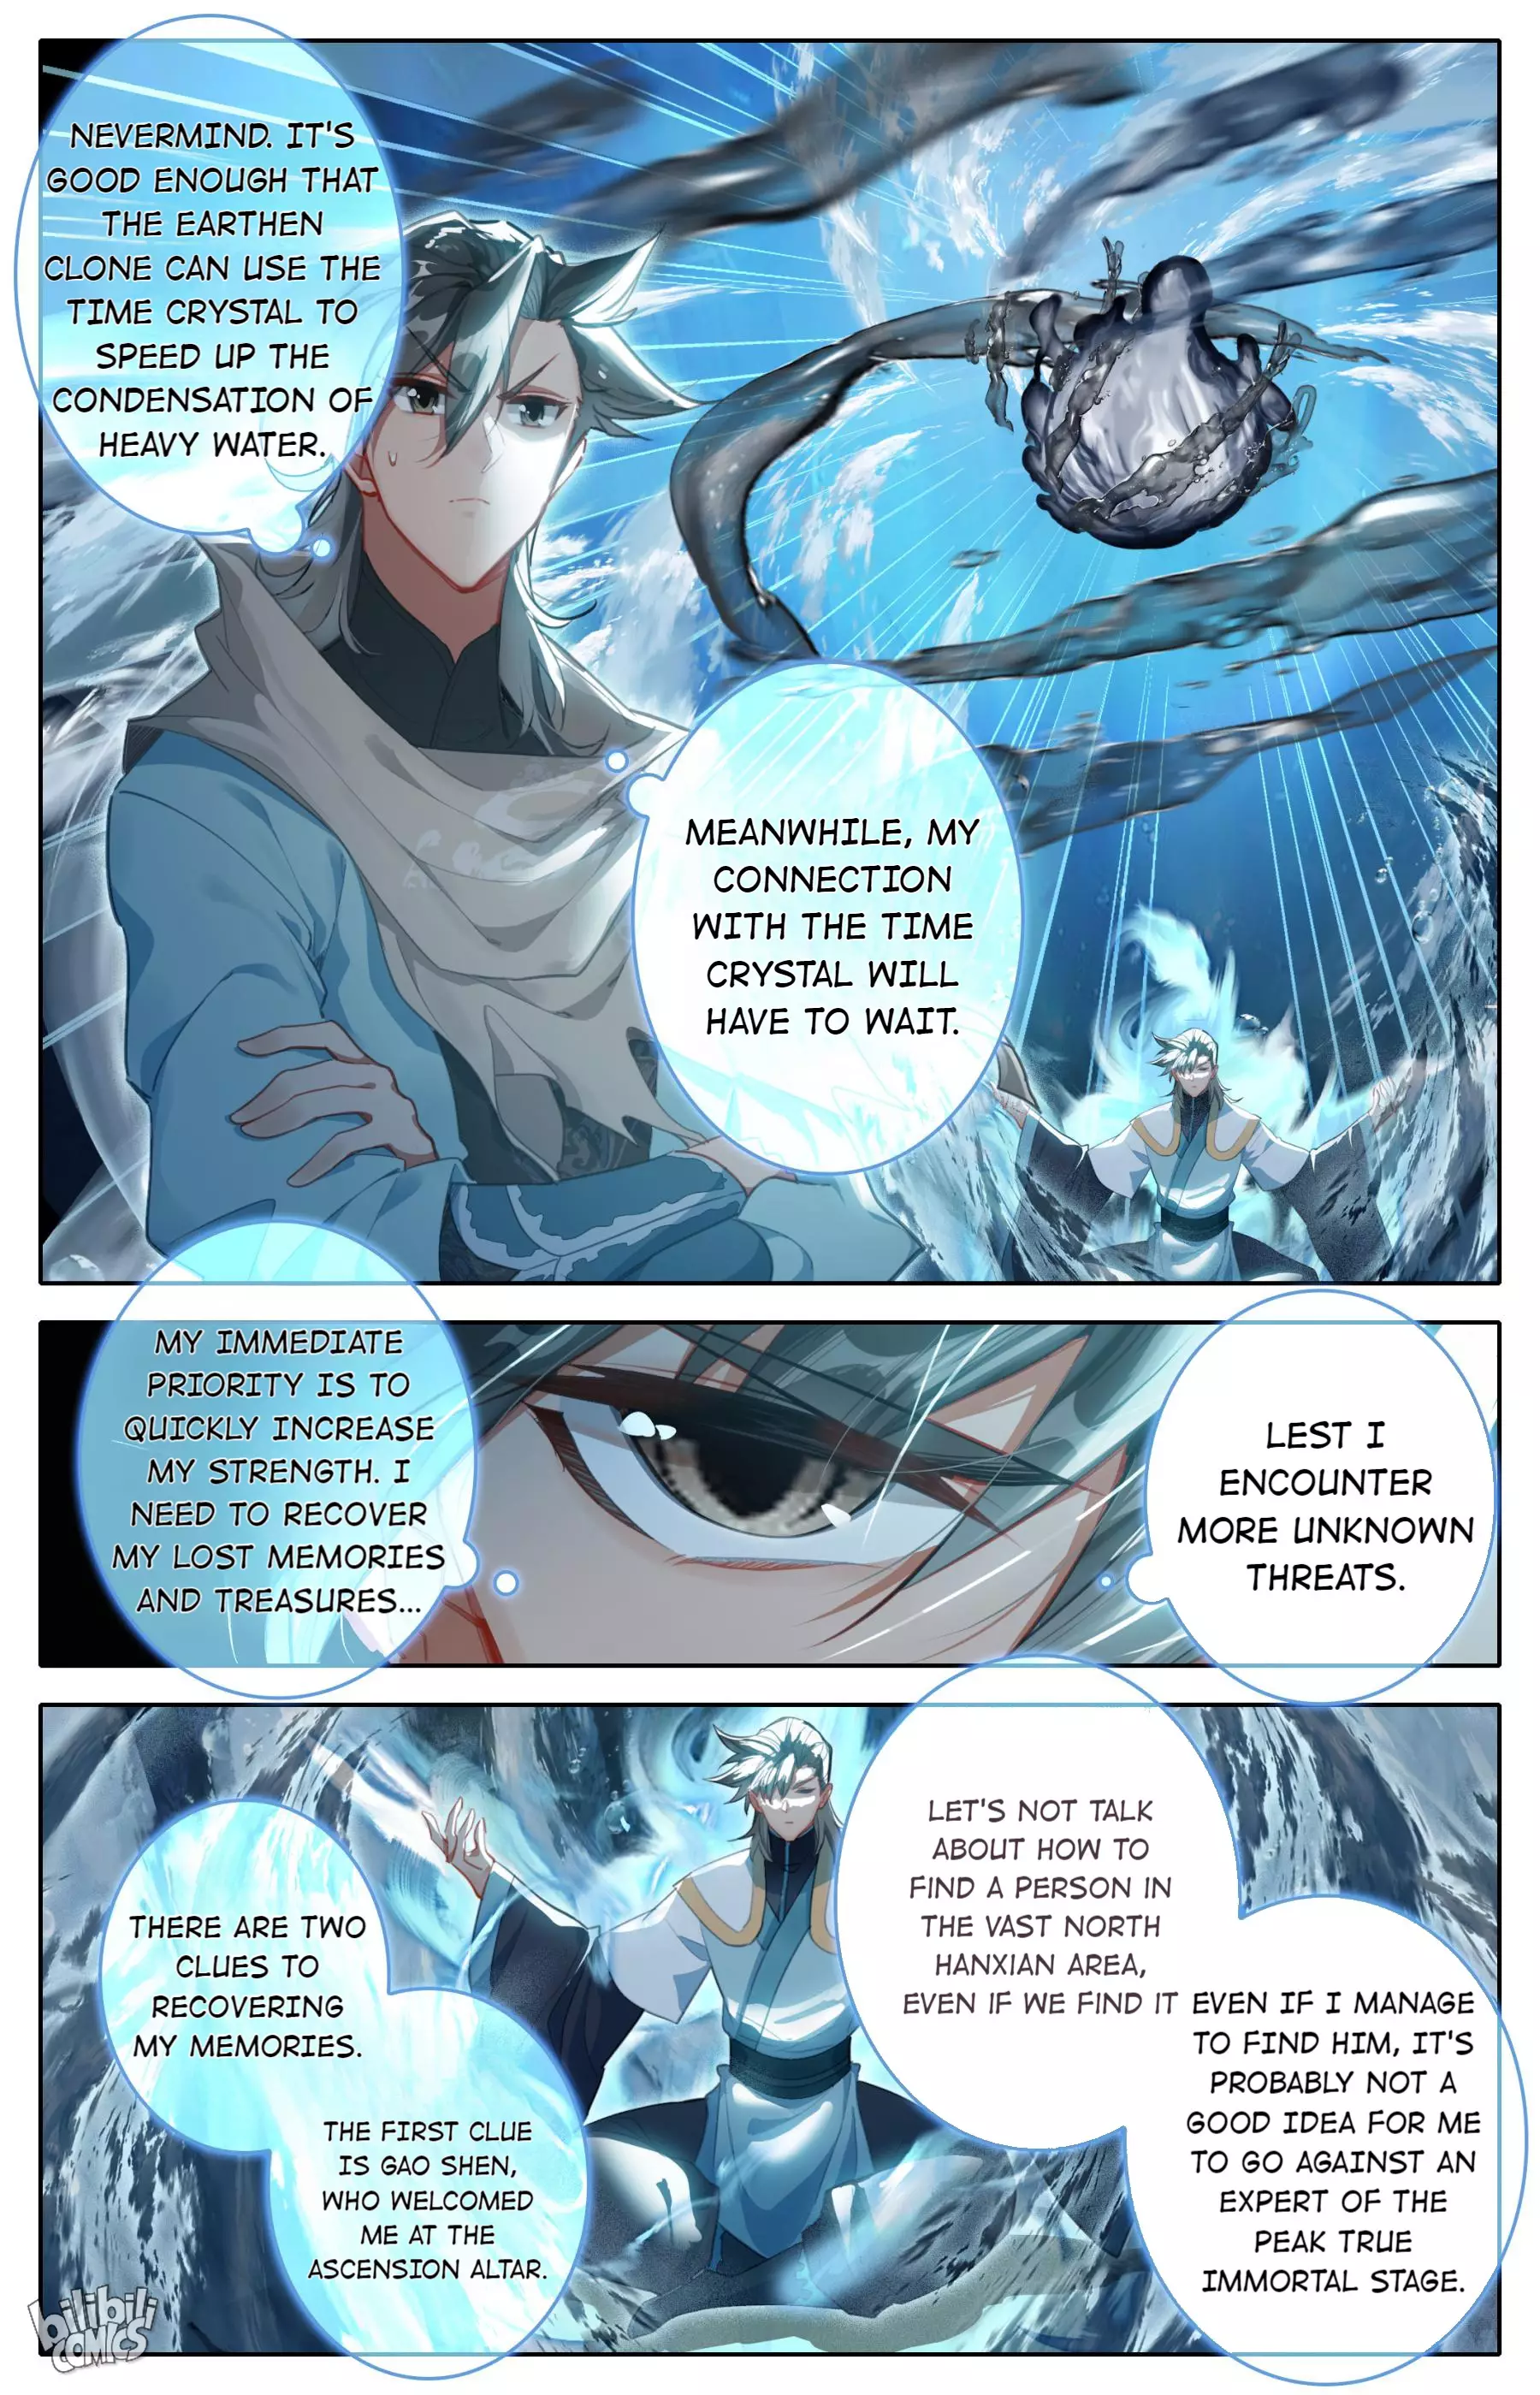 A Record Of A Mortal's Journey To Immortality—Immortal World Arc - 132 page 7-18c85a0f